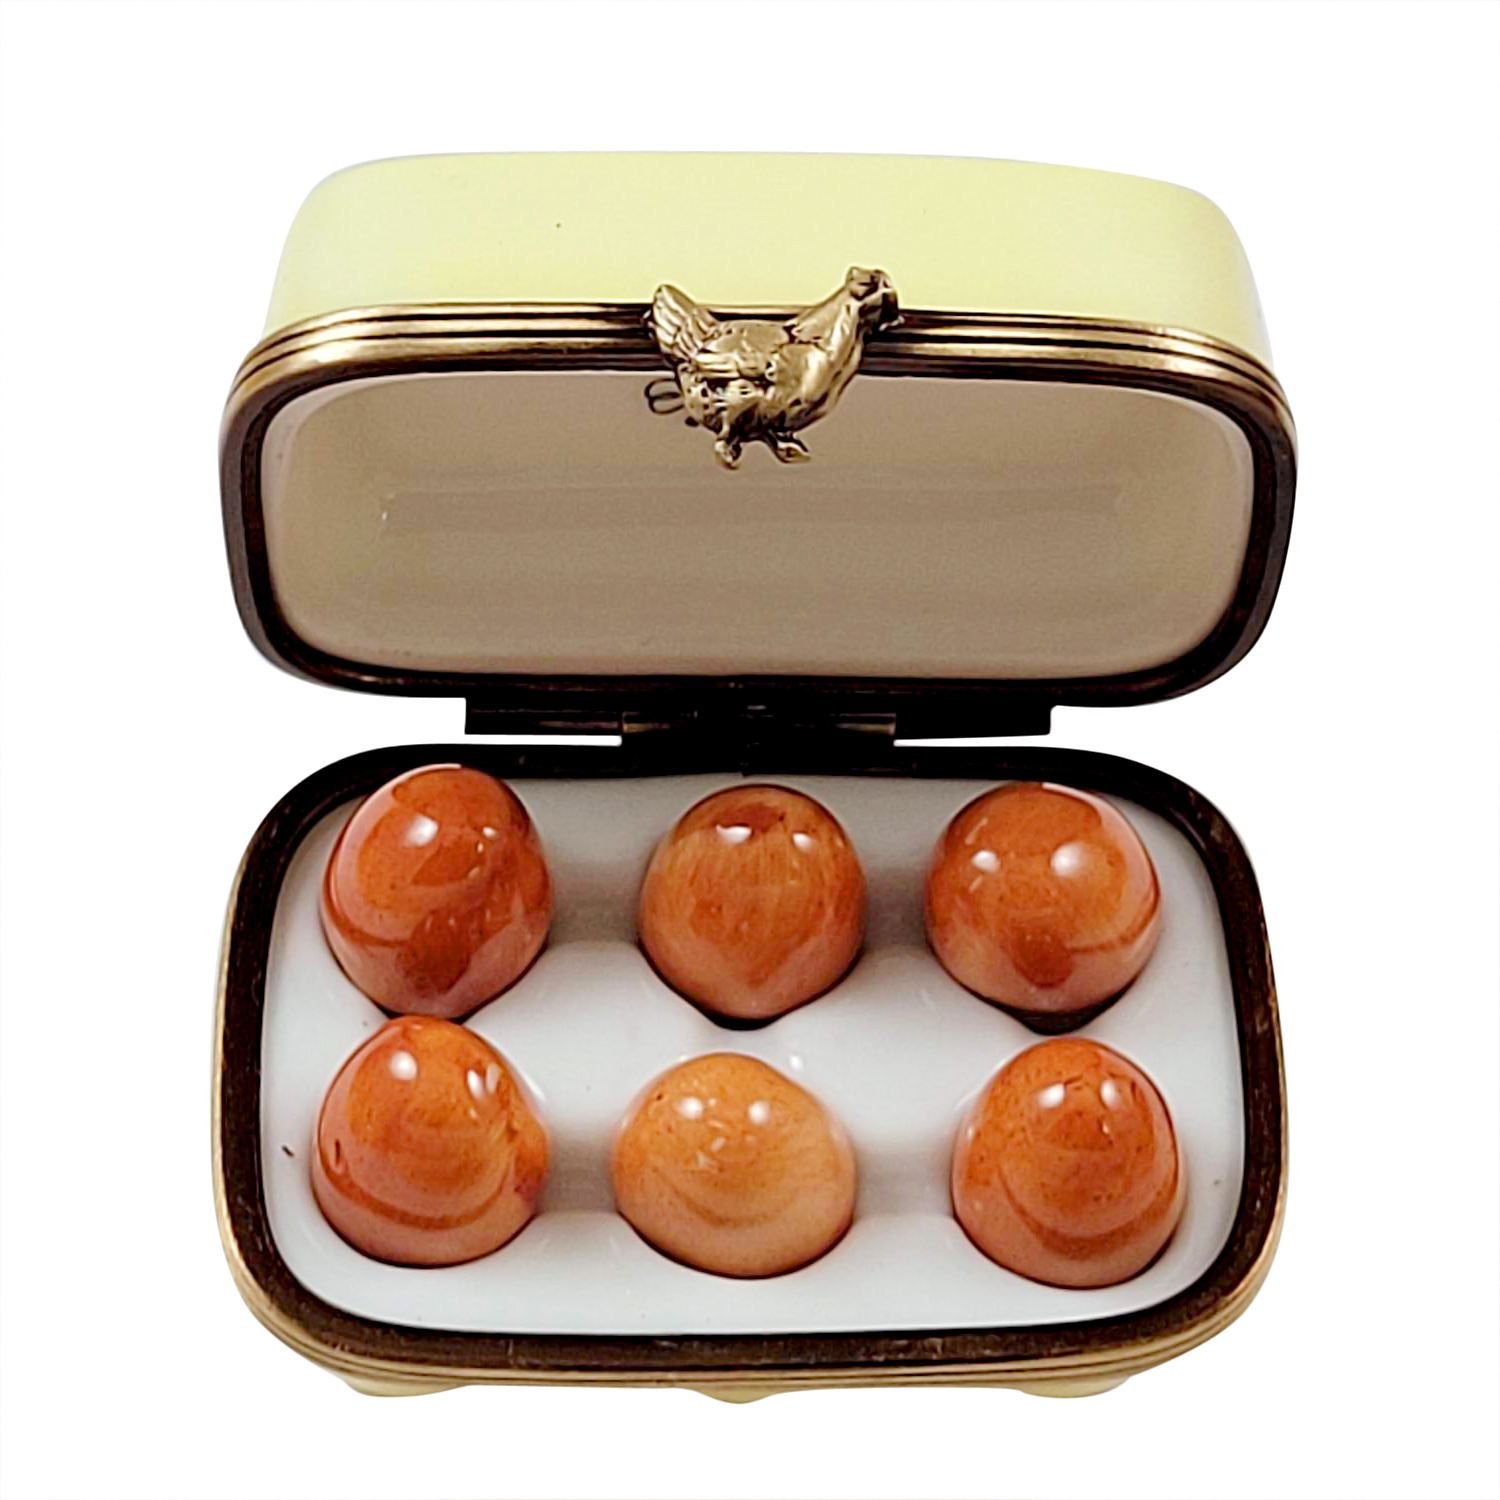 EGG CRATE WITH SIX BROWN EGGS